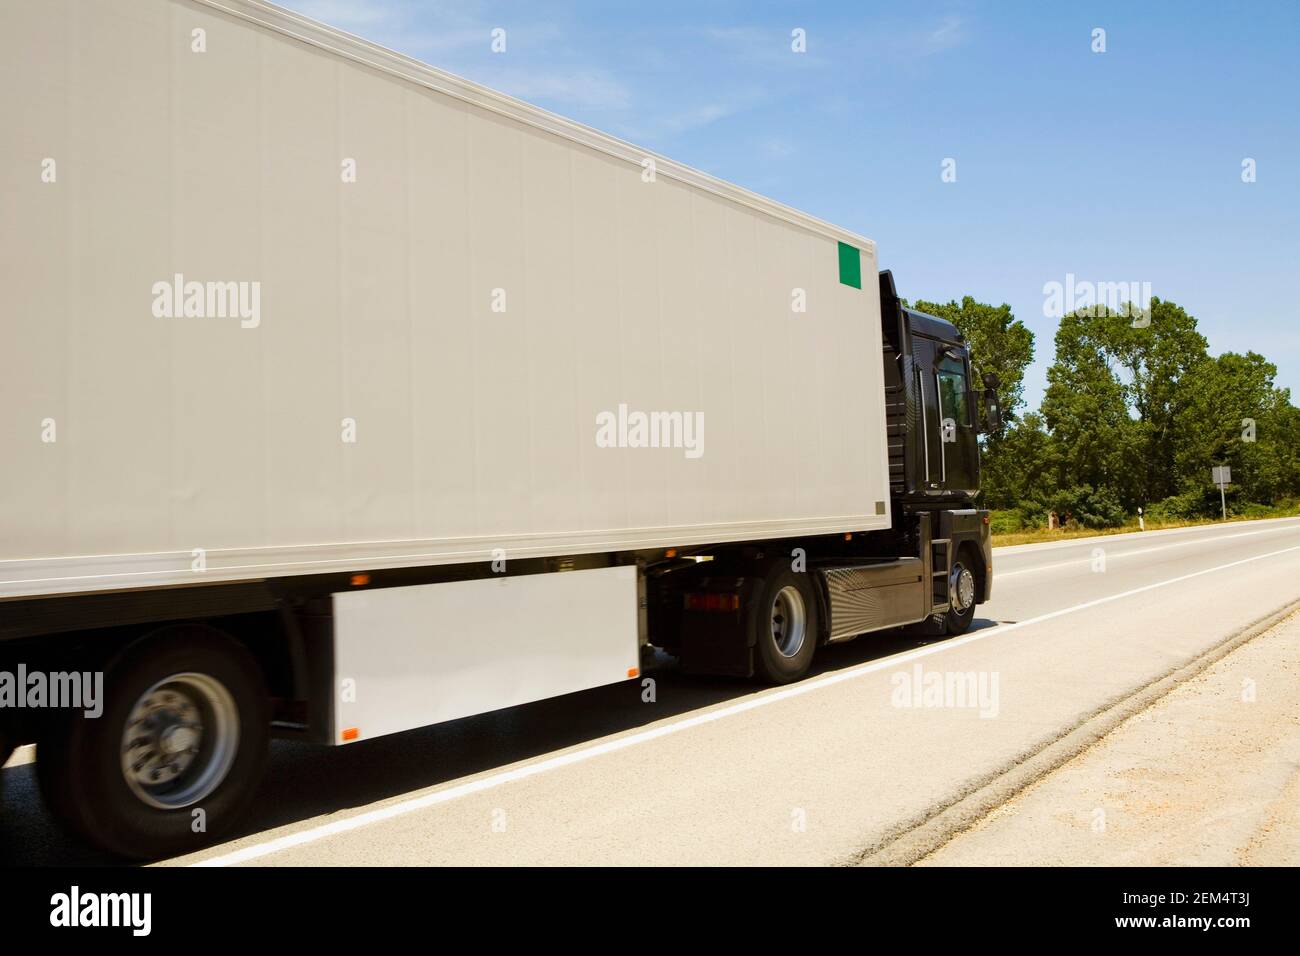 Semi-truck moving on the road Stock Photo